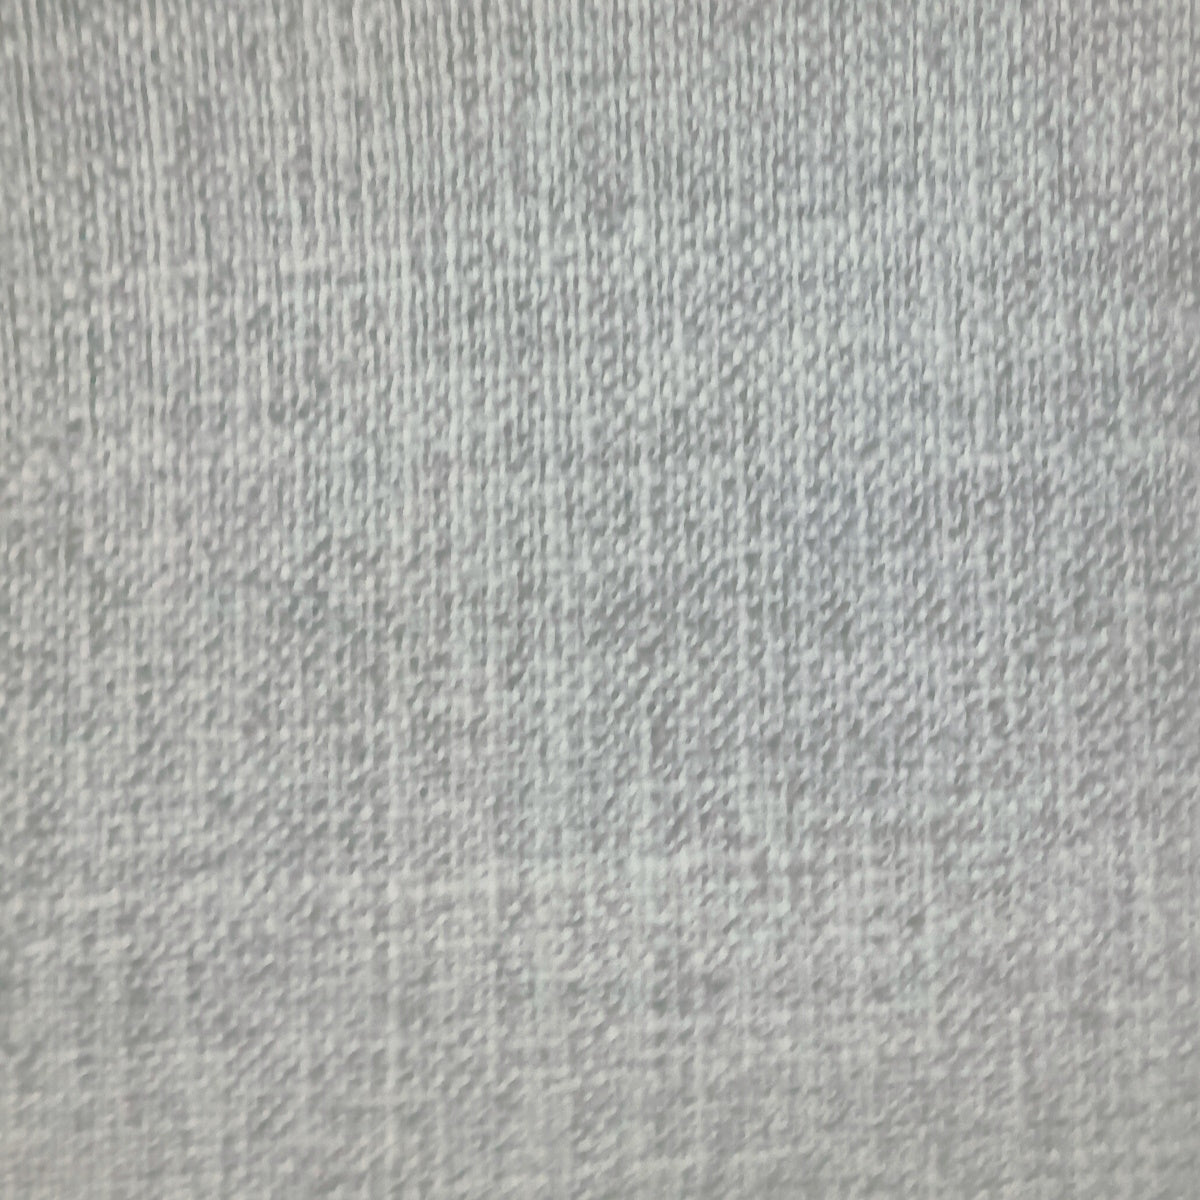 Home fabric for curtains in grey